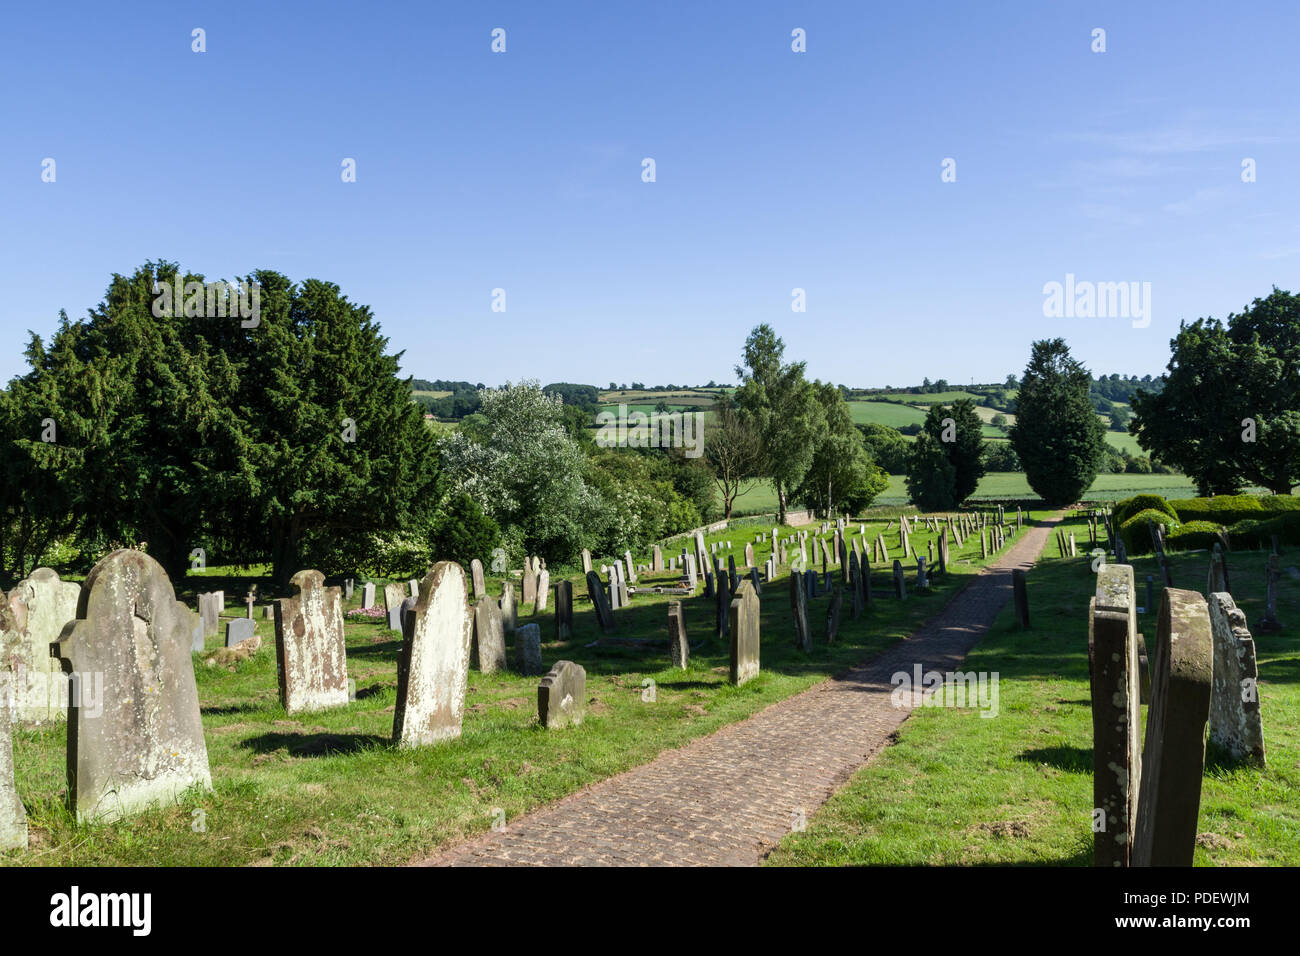 a view across the graveyard to the countryside beyond, from the church of St Michael in the village of Coxwold, North Yorkshire, UK Stock Photo